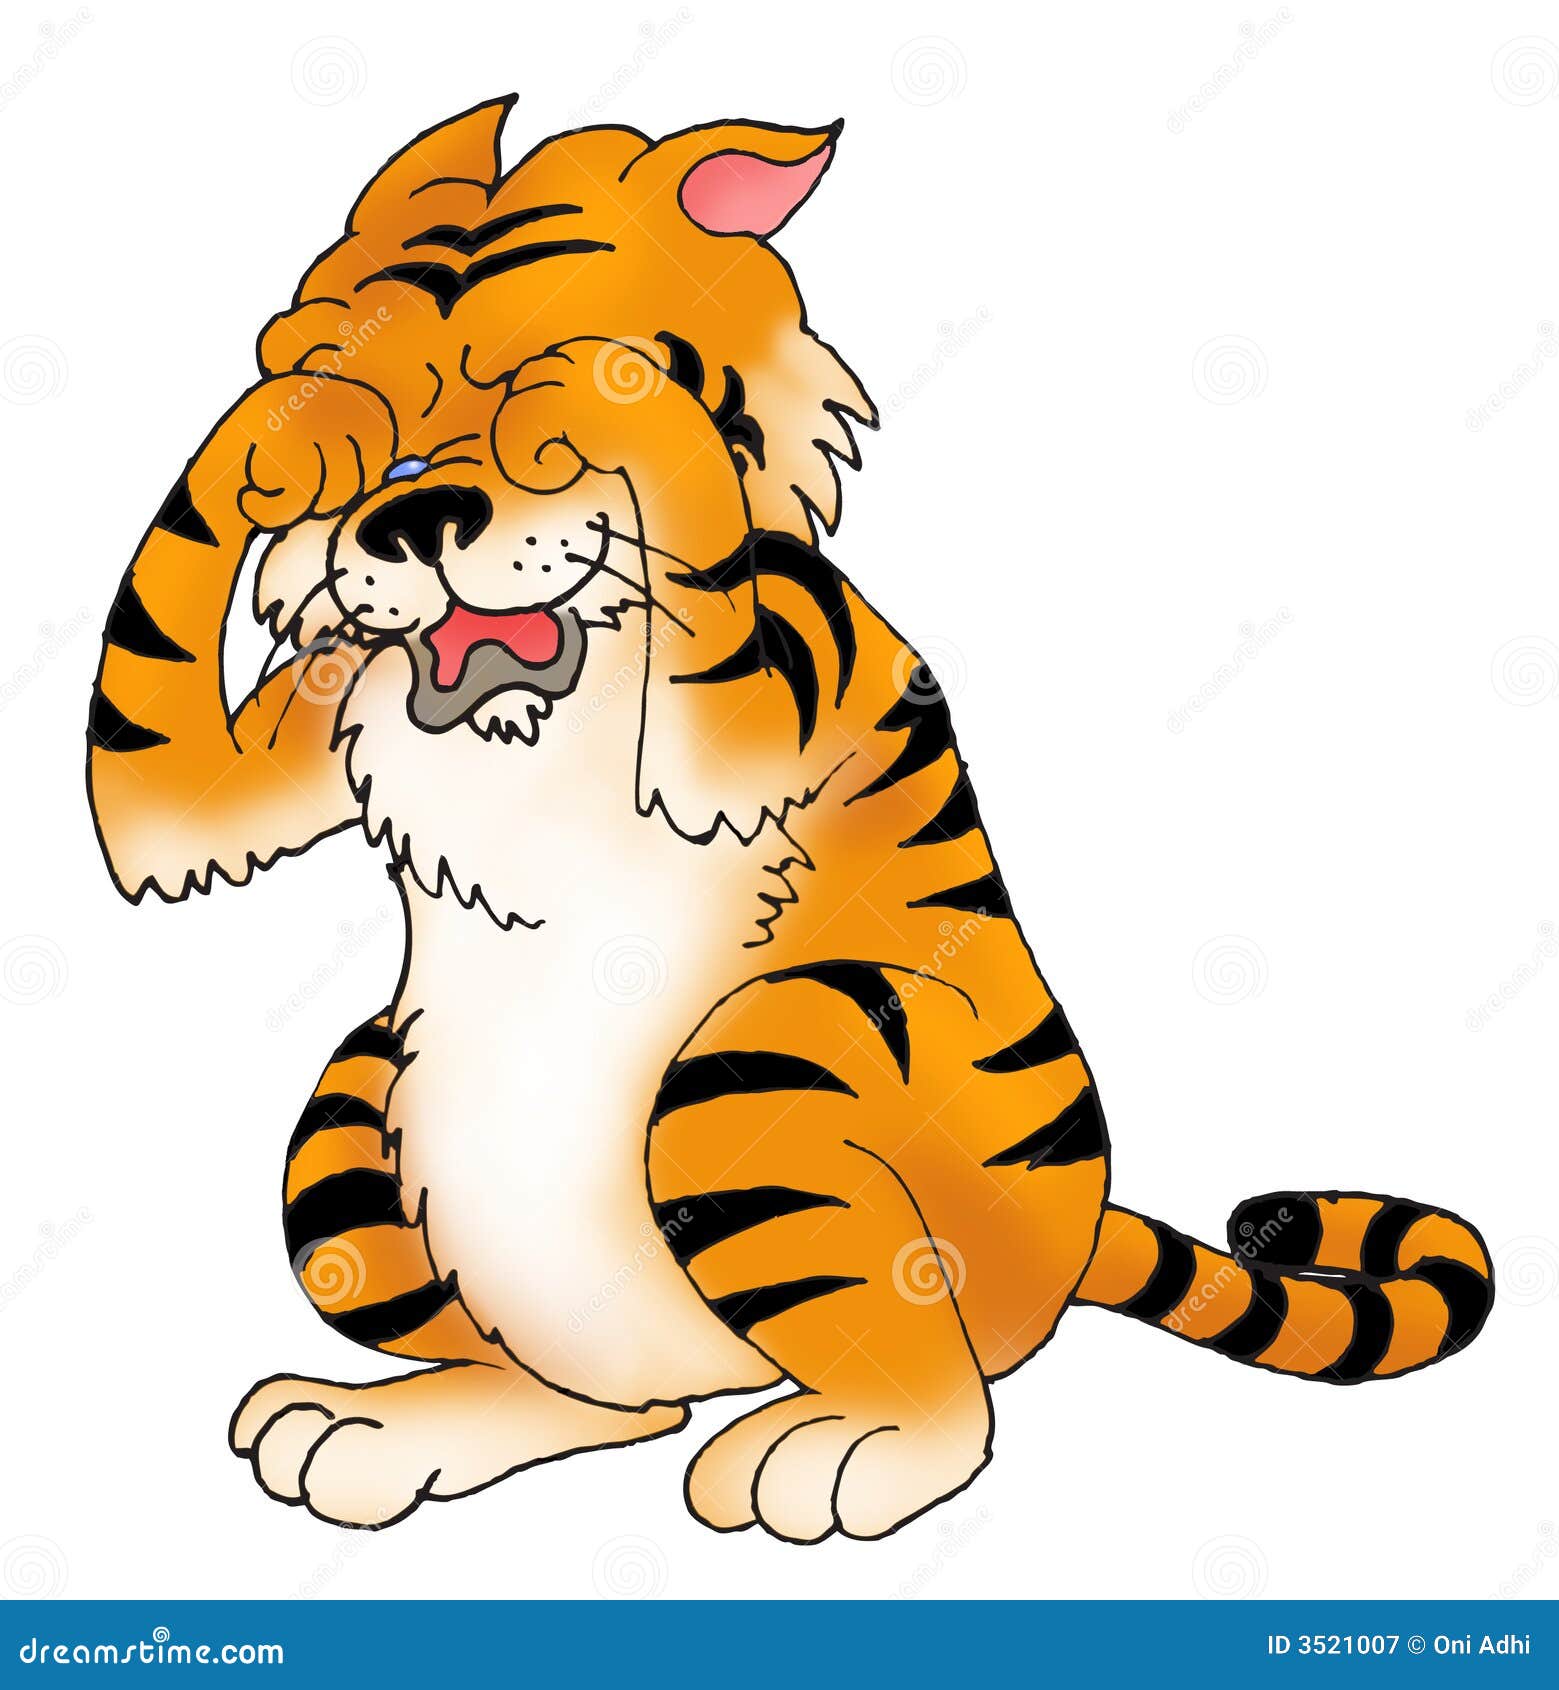 crying-tiger-freehand-3521007.jpg